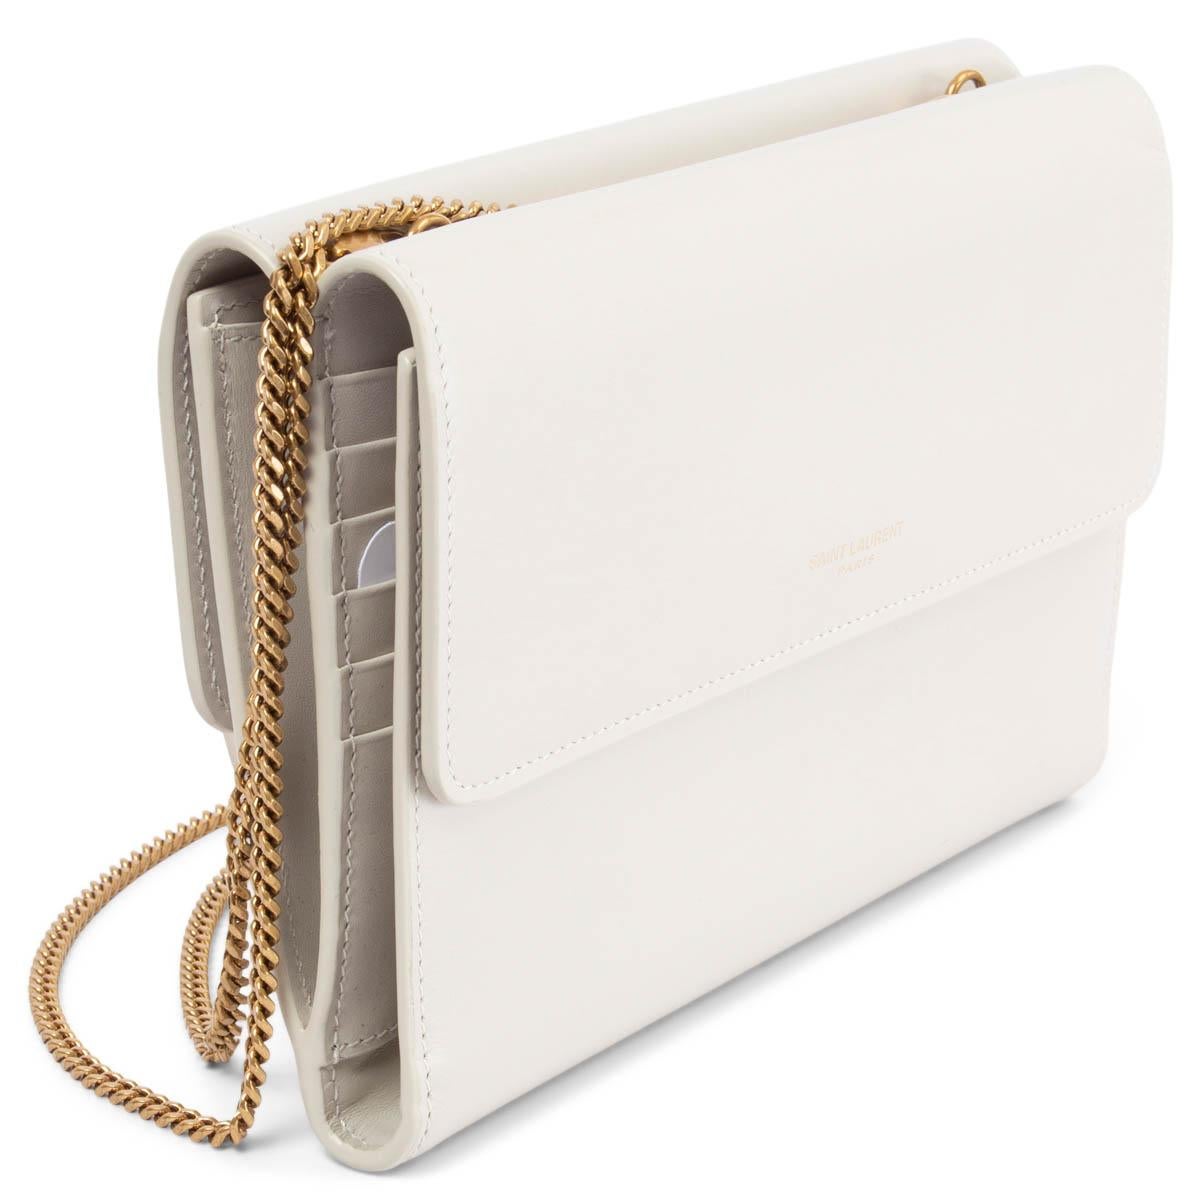 100% authentic Saint Laurent Double Flap bag in ivory smooth calf leather featuring antique gold-tone metal chain and debossed logo at front. The design opens from both sides with a flap and magnetic snap closure. Lined in smooth ivory calfskin with